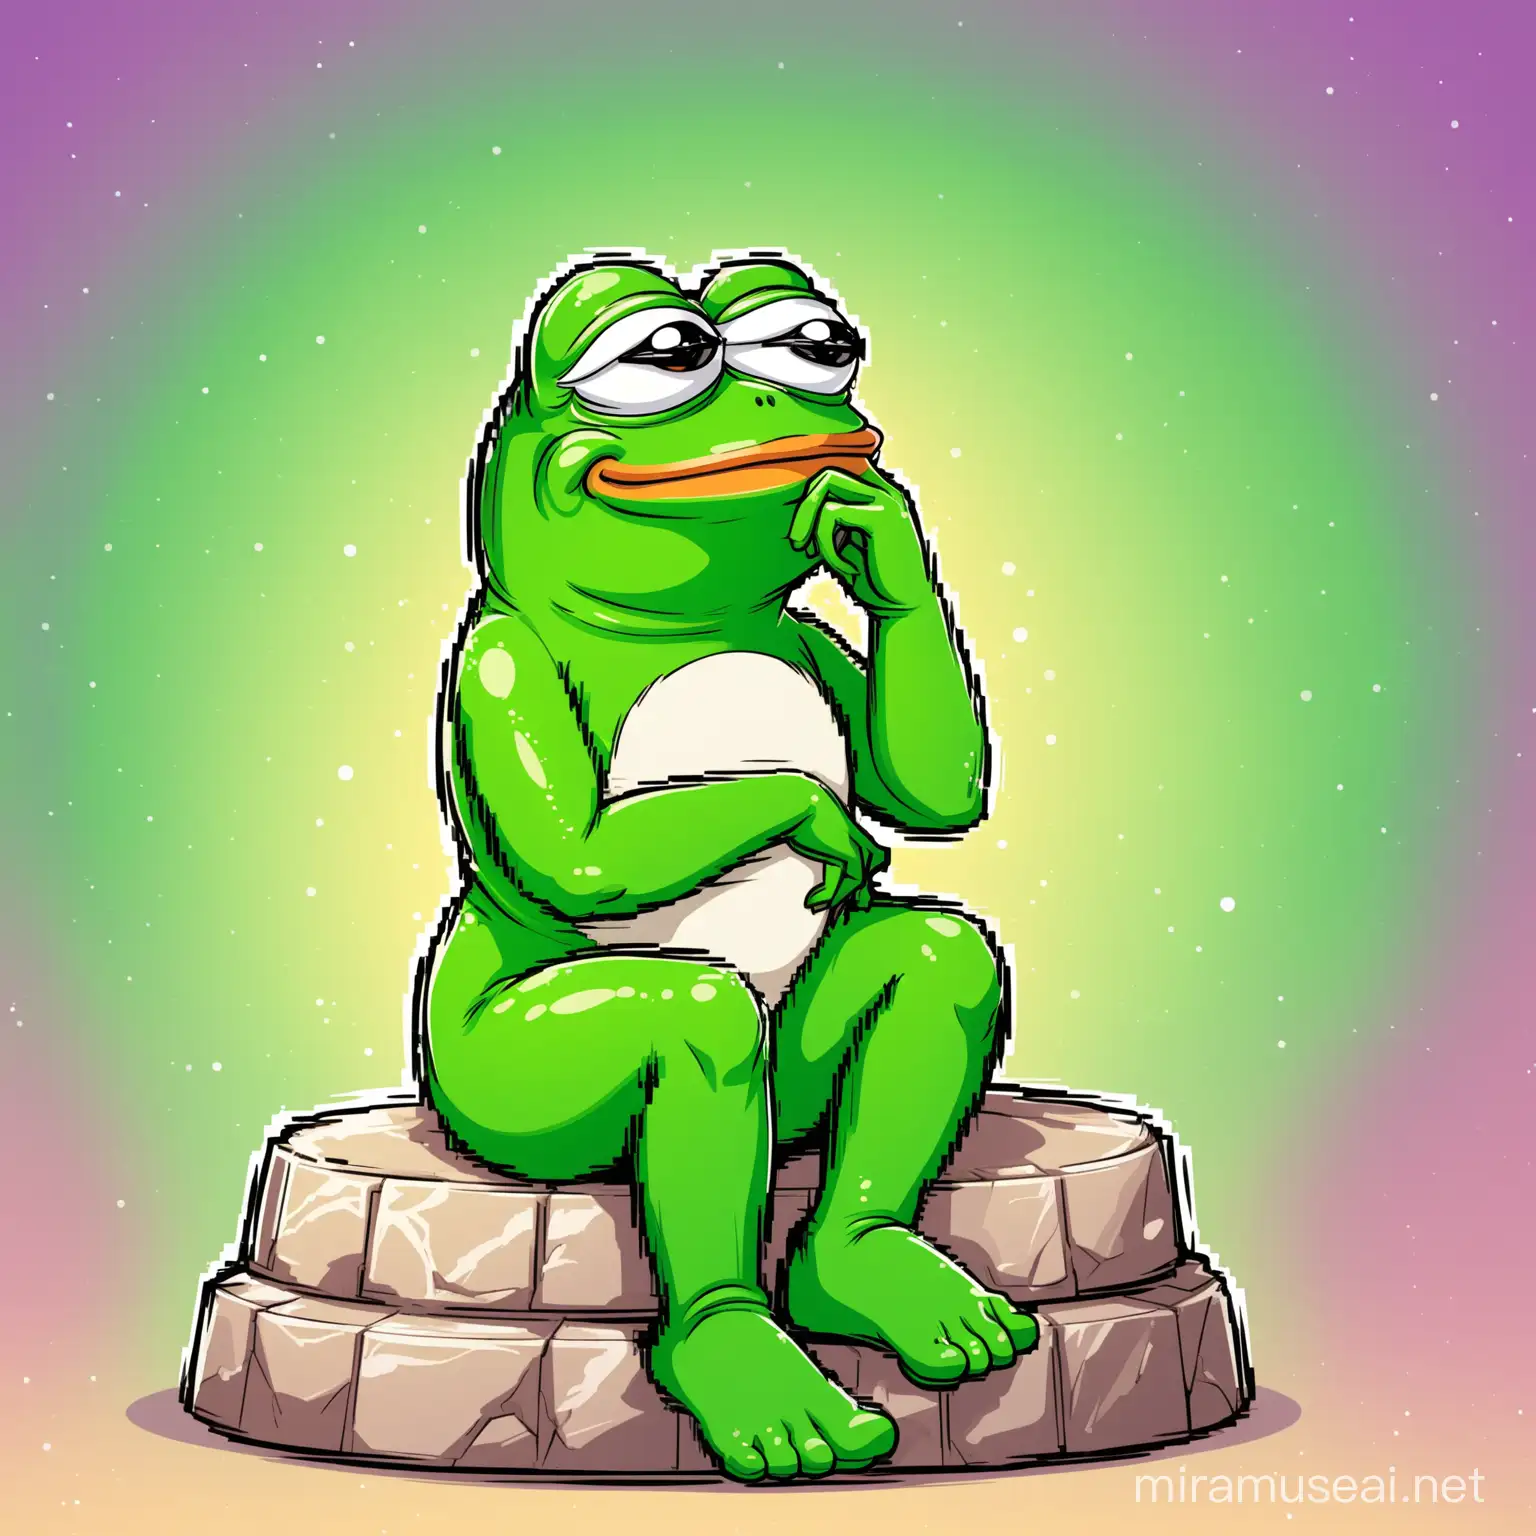 Pepe Frog crypto cartoon showing Pepe in a cute pose of the thinker statue